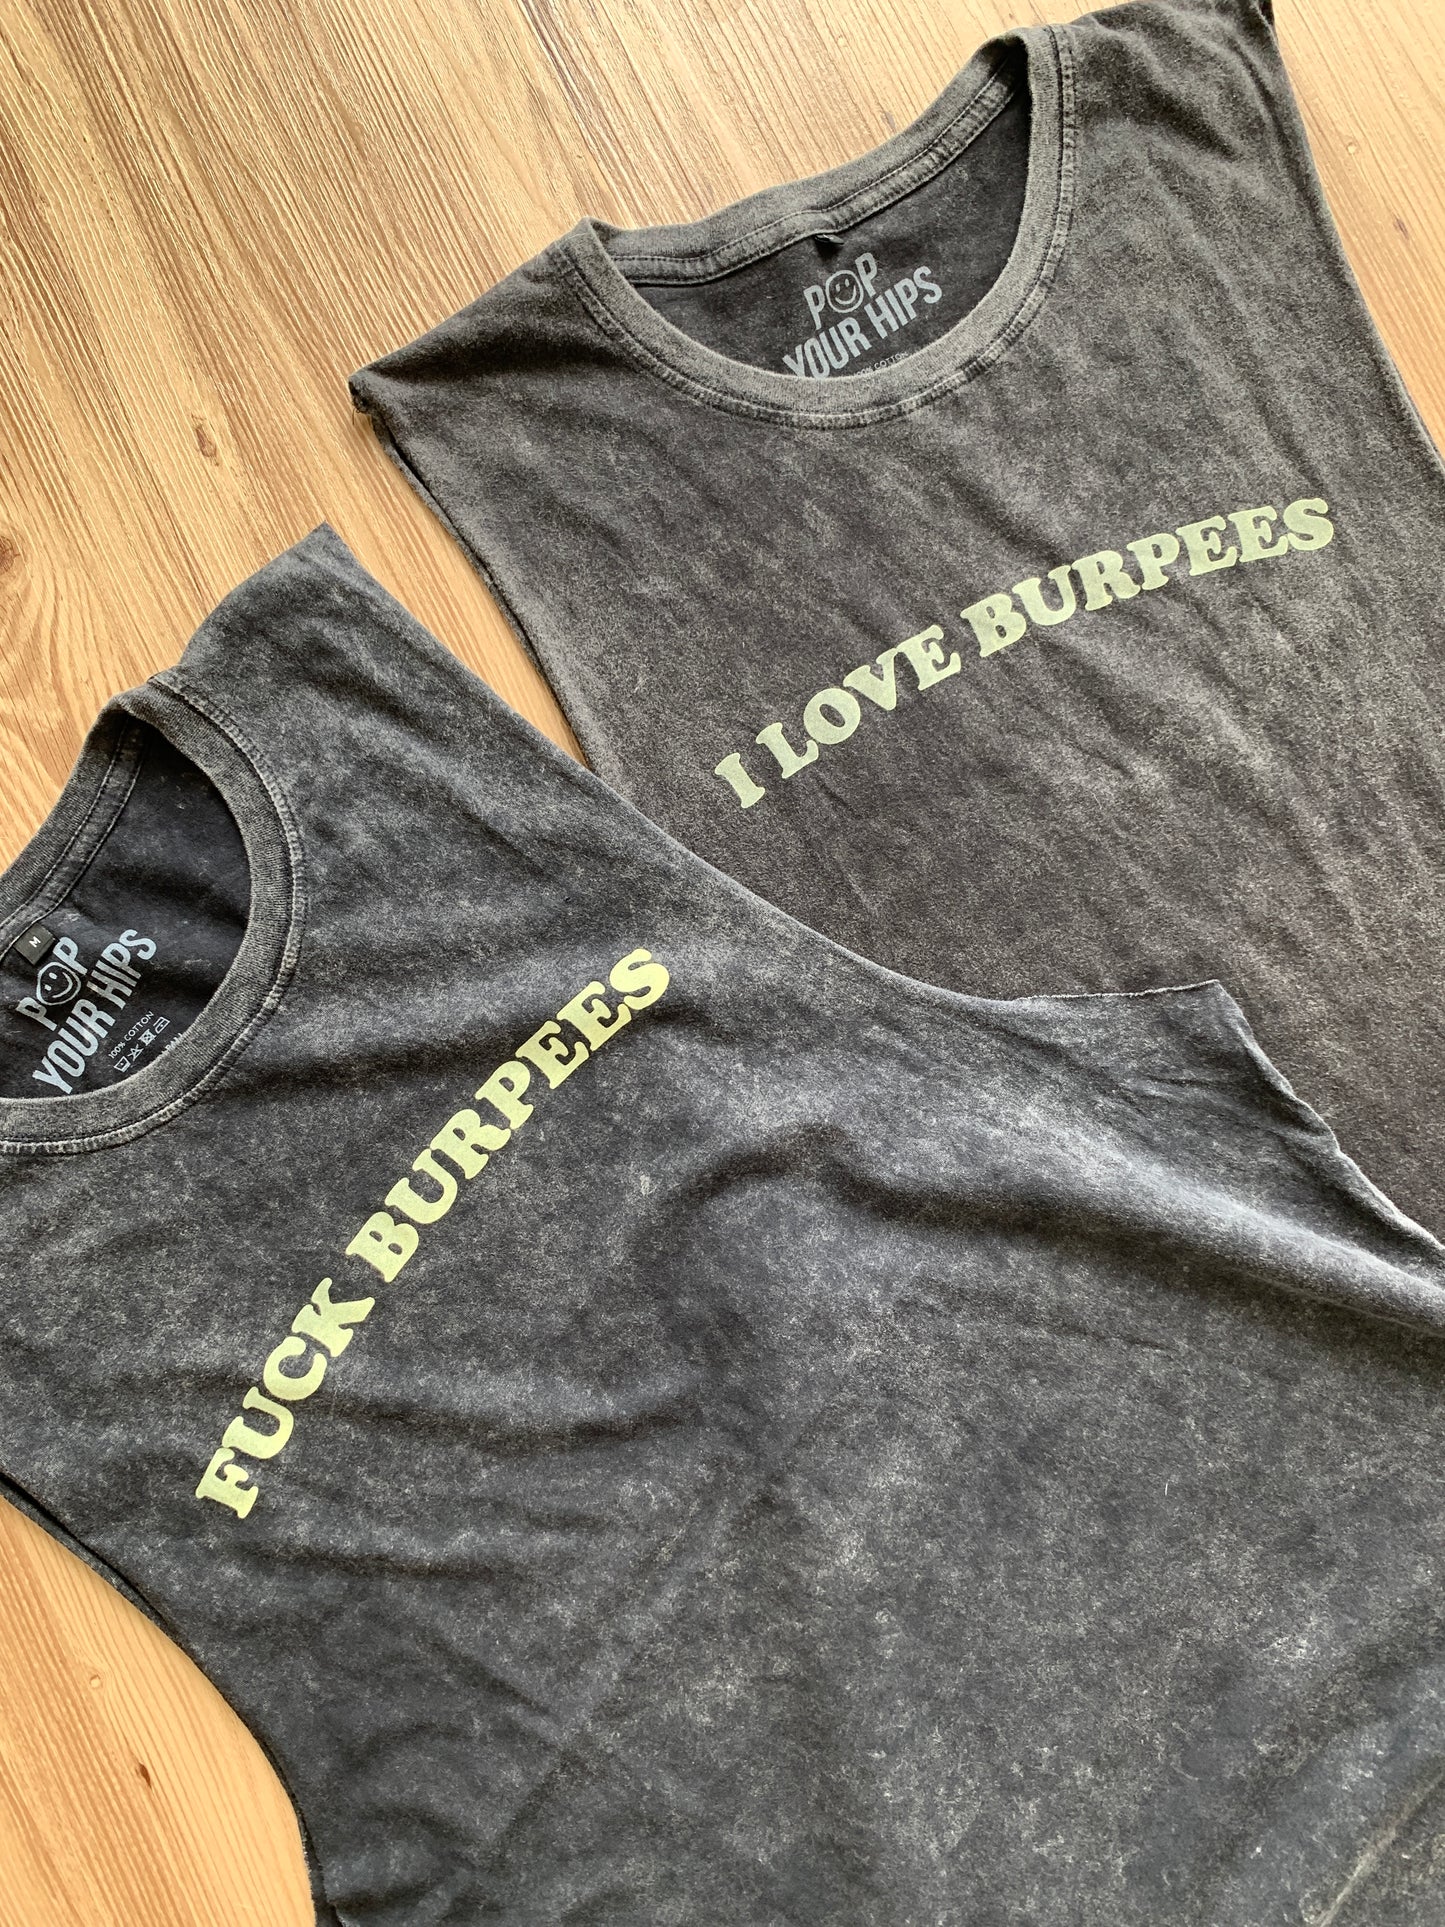 I love burpees muscle tank